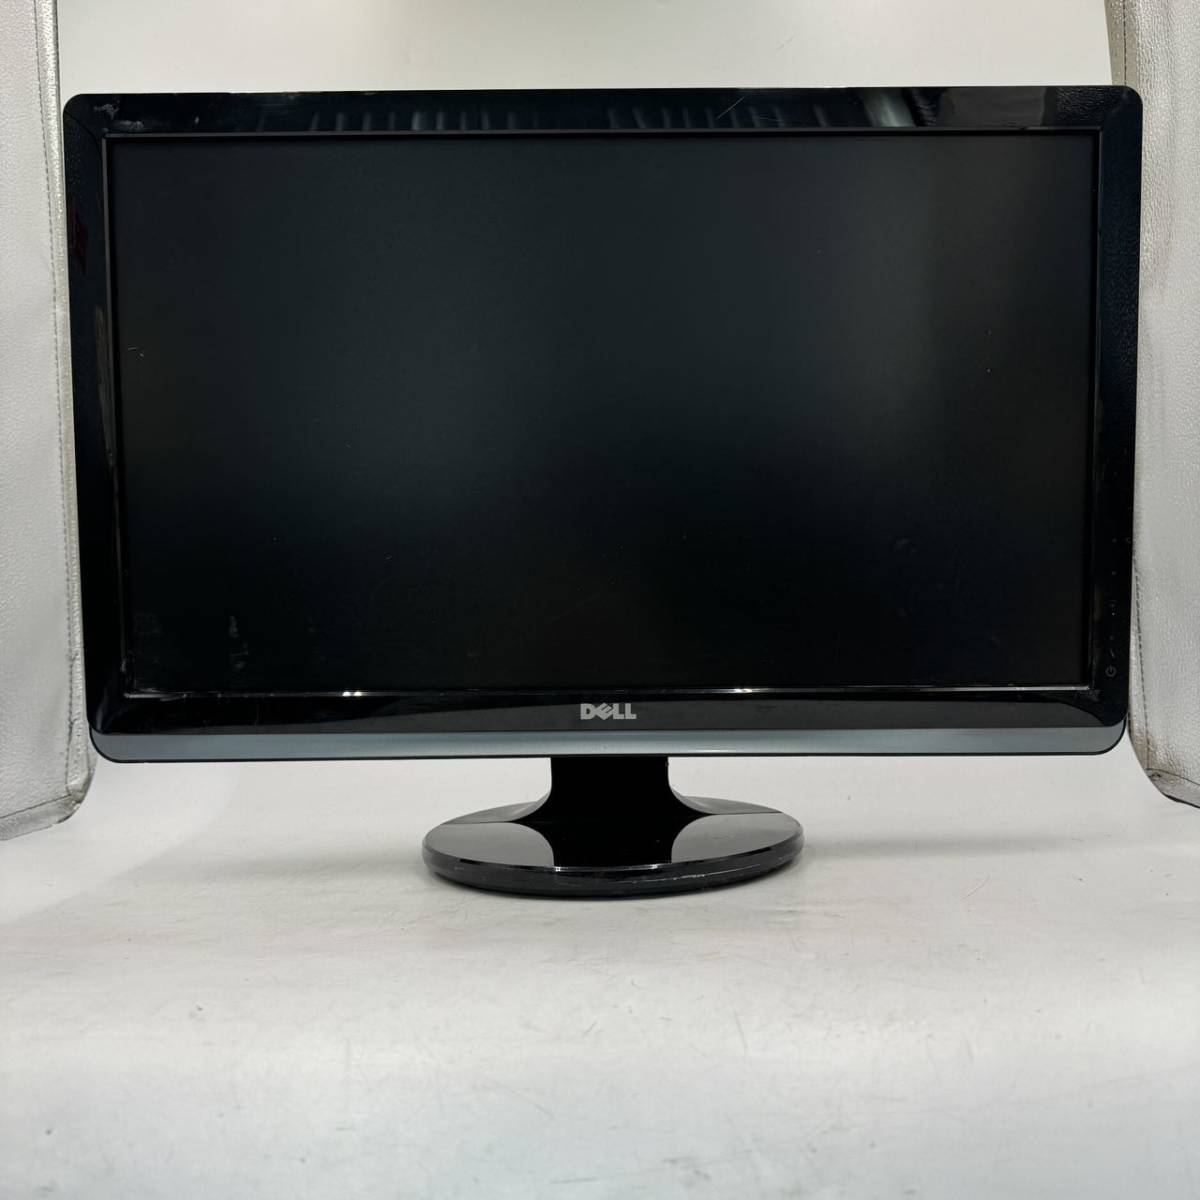 1 jpy start / junk /DELL/ST2220Lb /21.5 -inch / liquid crystal / monitor / start-up un- possible / exterior scratch equipped 5039